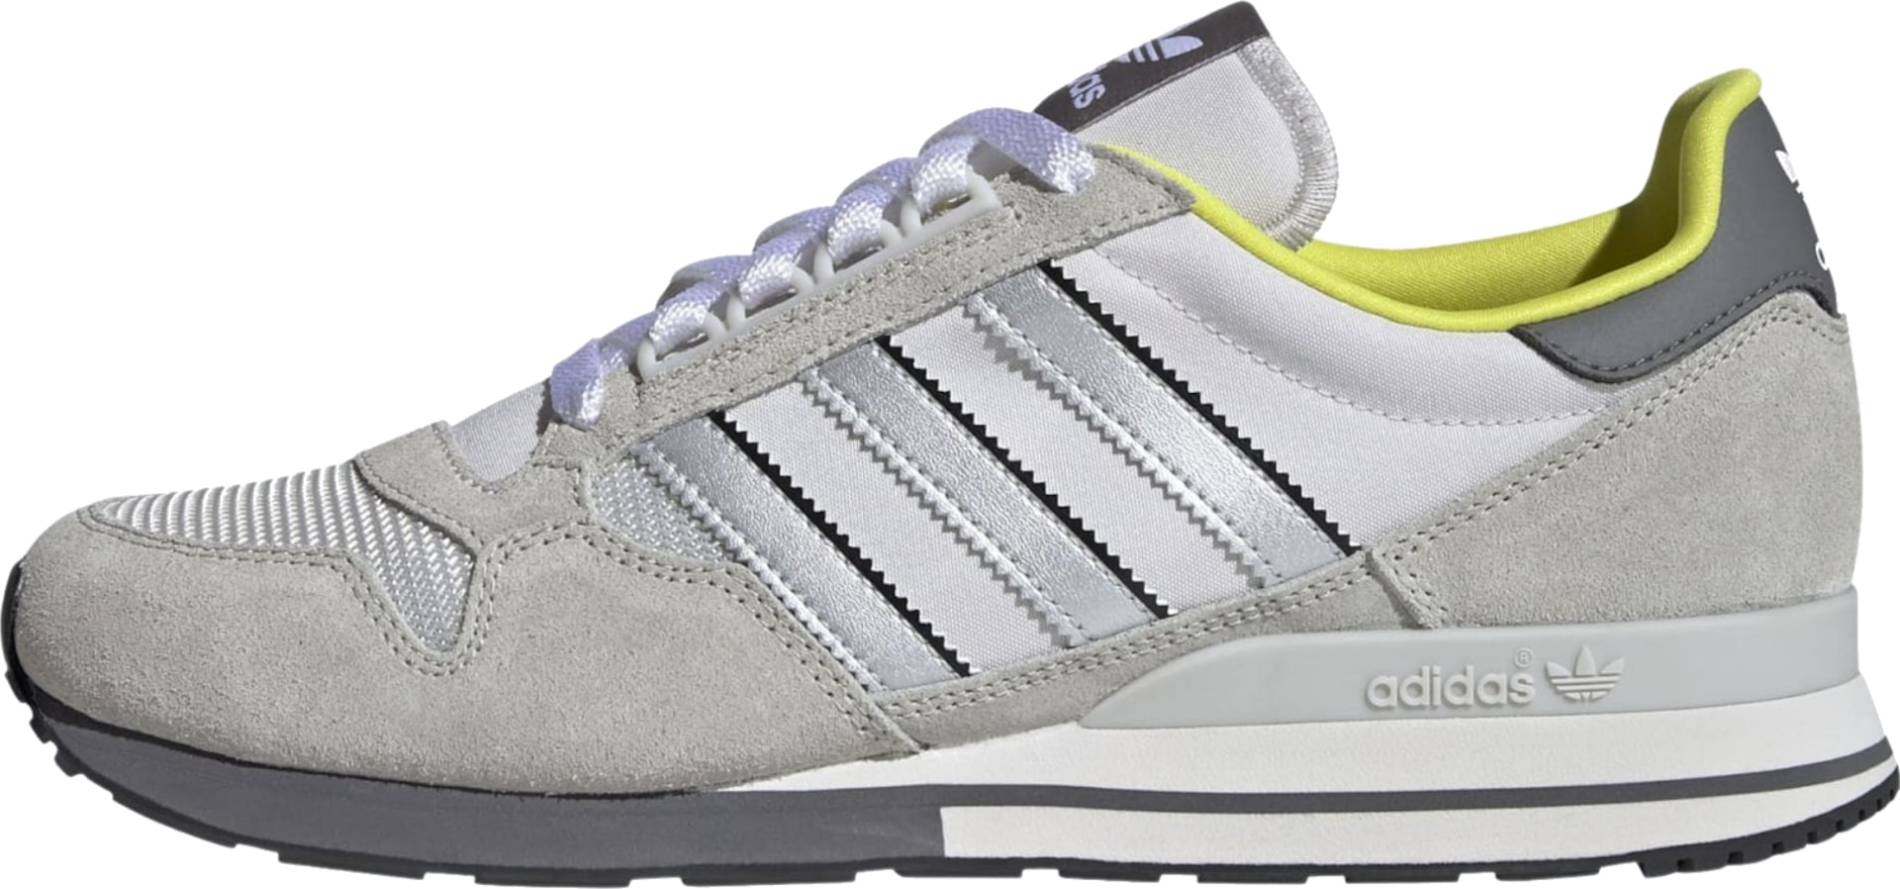 Adidas ZX 500 sneakers in grey (only 